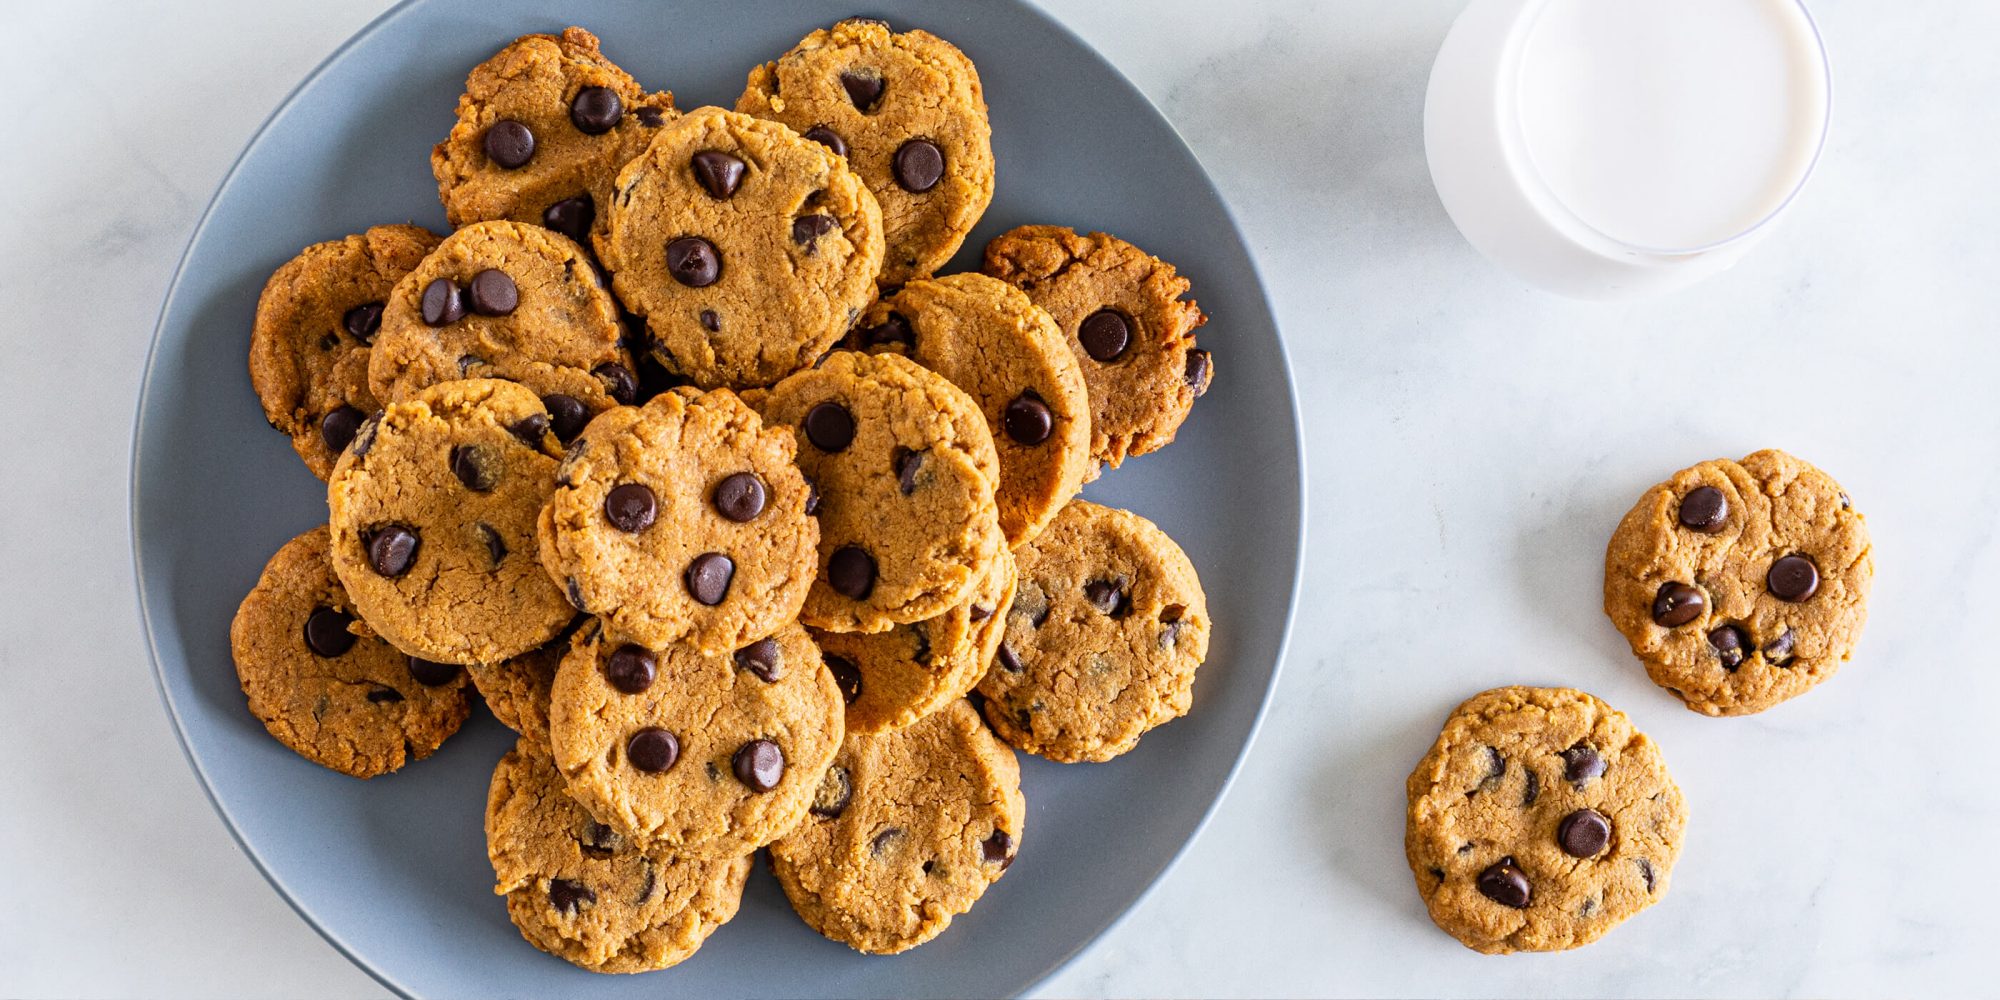 5-Ingredient Peanut Butter Chocolate Chip Cookies